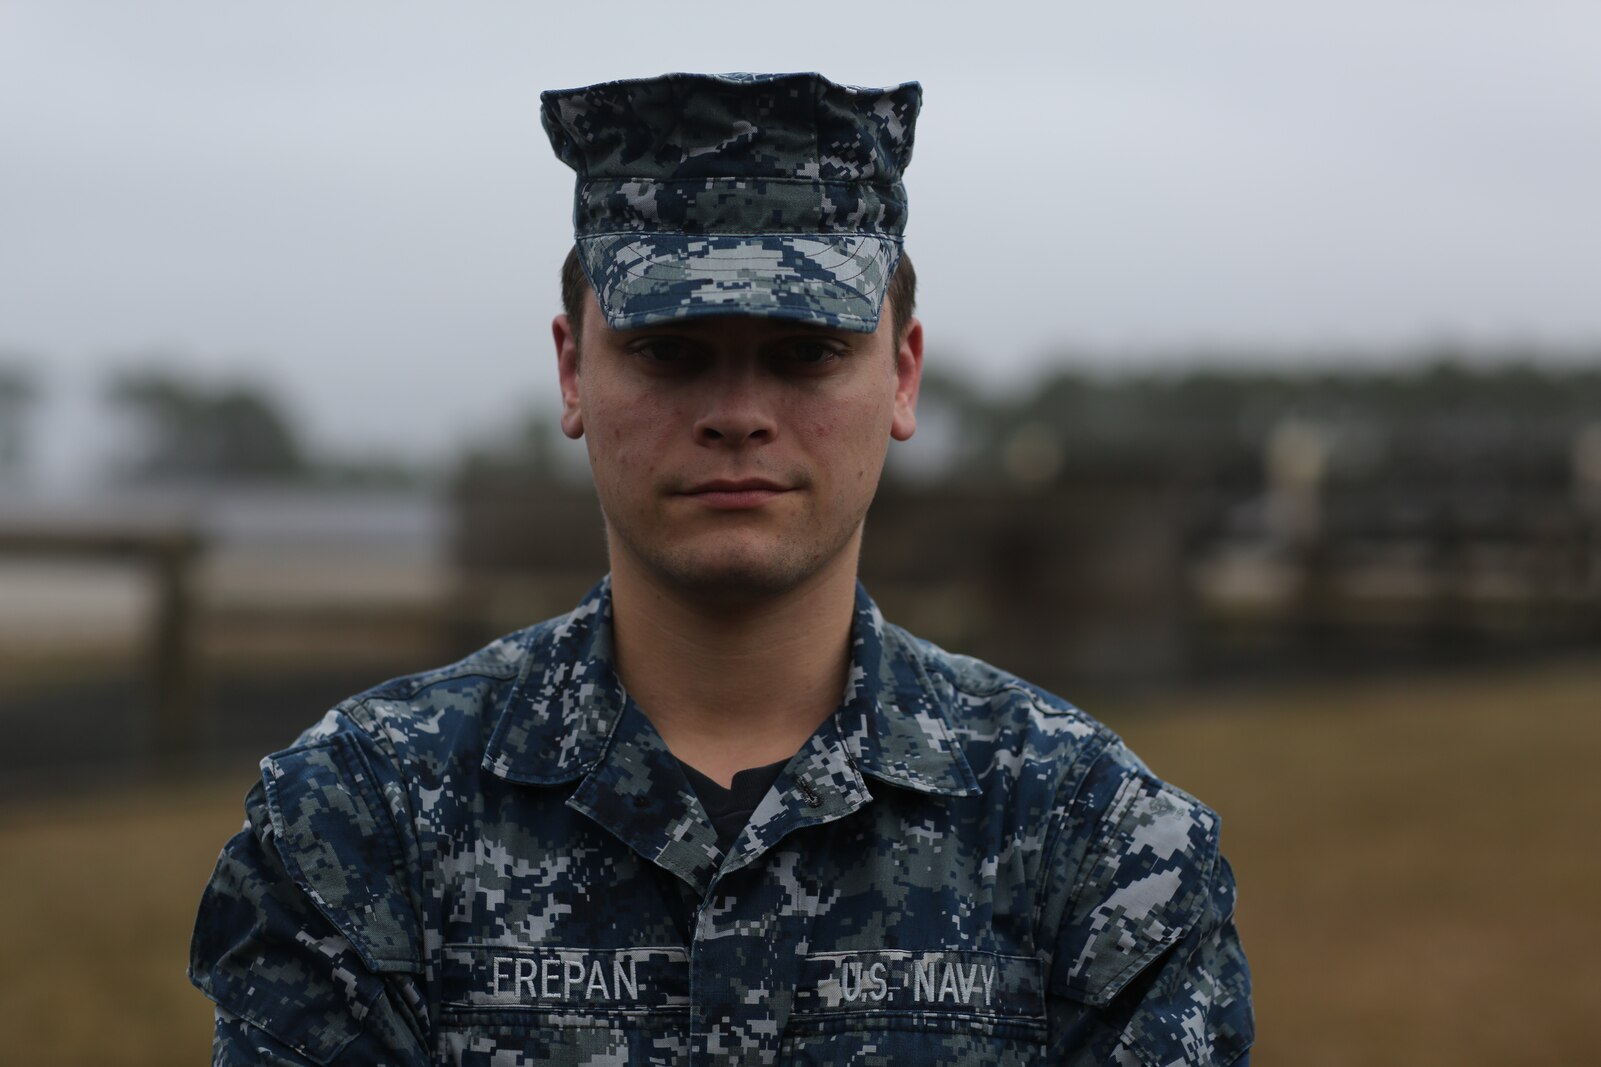 Seaman Joseph Frepan, a hospitalman assigned to Parris Island starts his day at midnight, hours before any recruits wake up, to prepare medical supplies for the next company’s Crucible. The training doesn’t start until he arrives on site.  As one of many U.S. Navy Corpsmen assigned to Parris Island, Frepan’s top priority is the recruits’ physical and mental welfare

 “Most people don’t understand the amount of time that it takes for us to be fully prepared for [the crucible] The most rewarding part about being a Corpsman is when you get to help someone. Even though a lot of the time you aren’t recognized for it, it’s still helping people who need it, and it’s worth all the effort.”